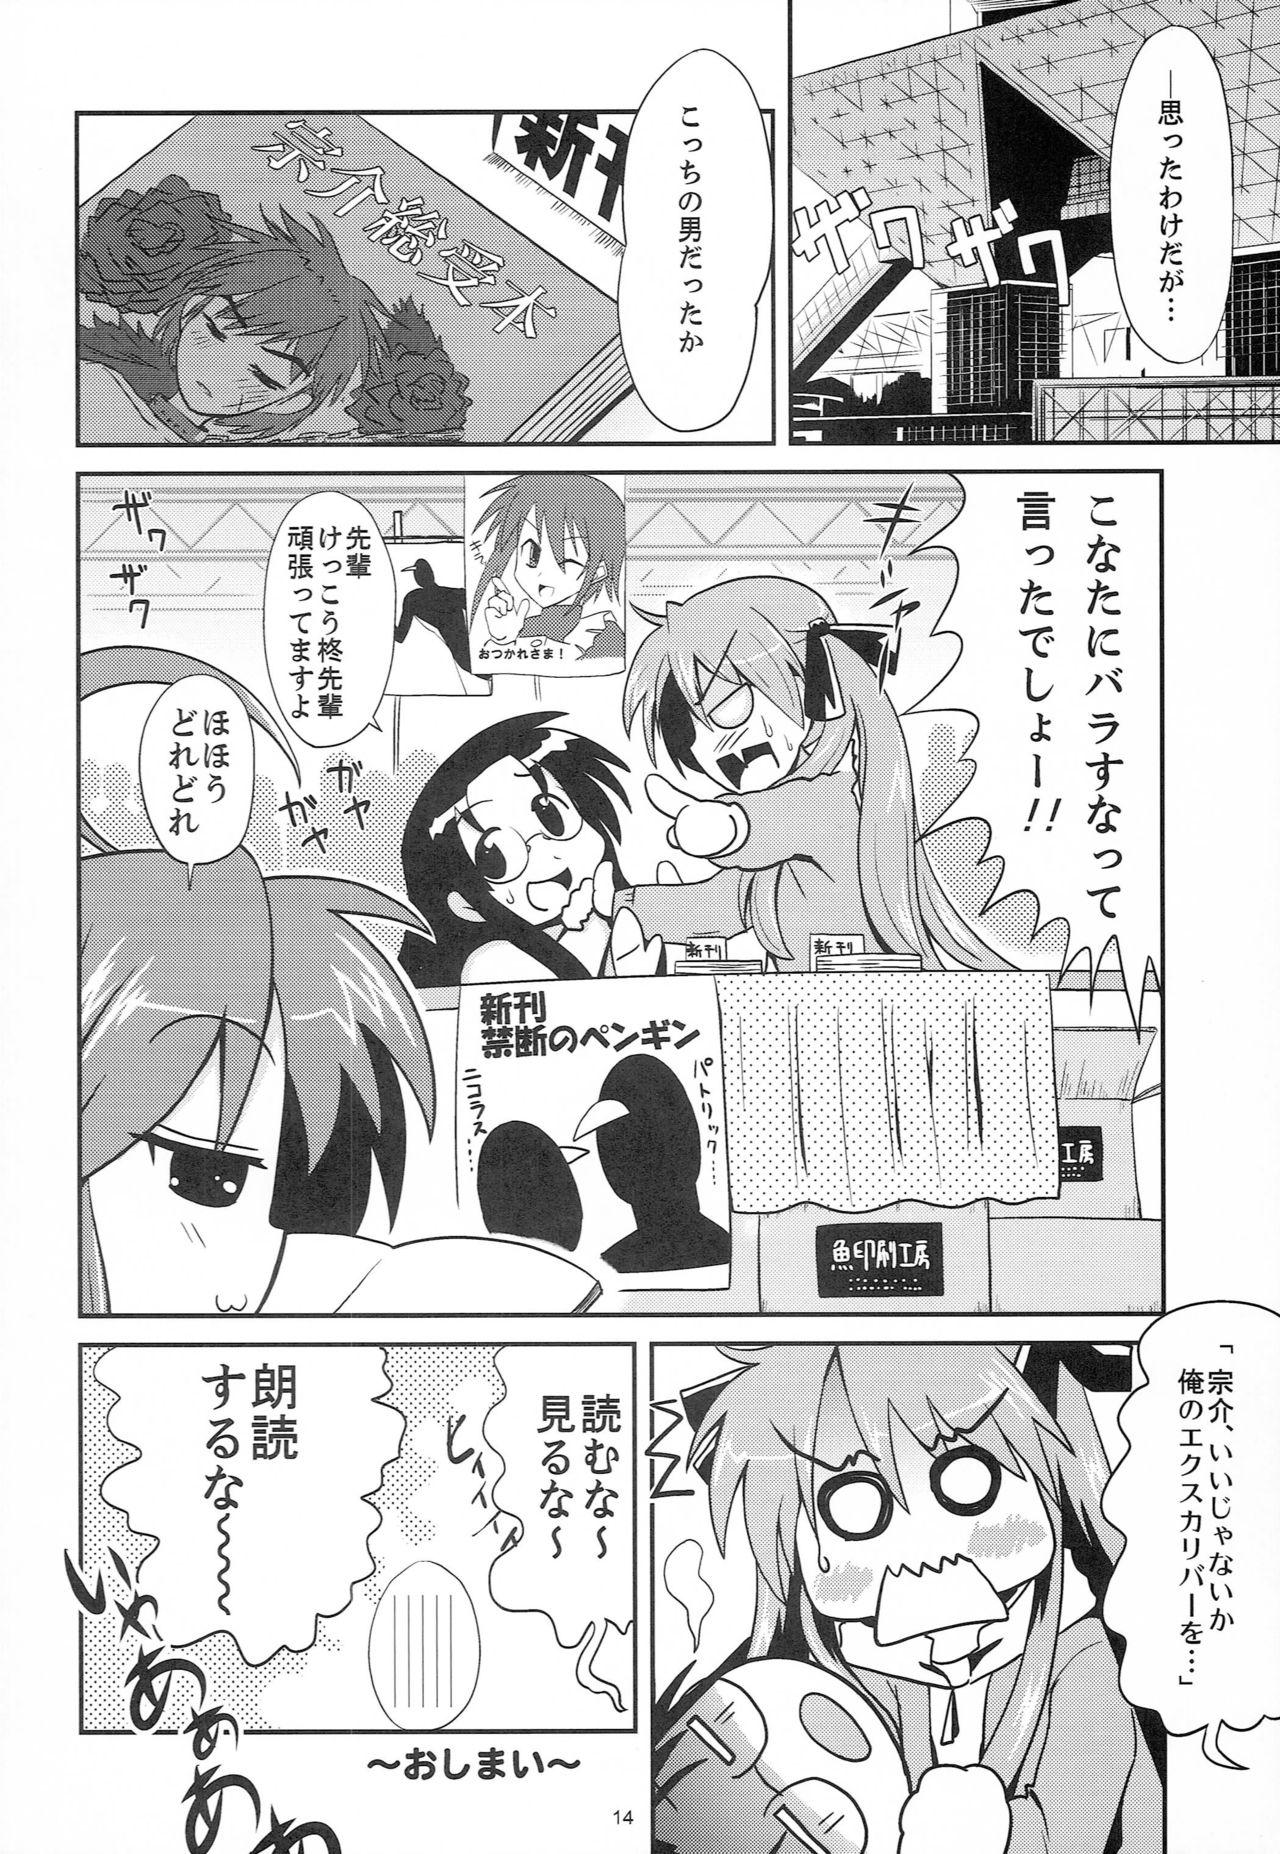 Perra Houkago no Kagamin - Lucky star Highheels - Page 13